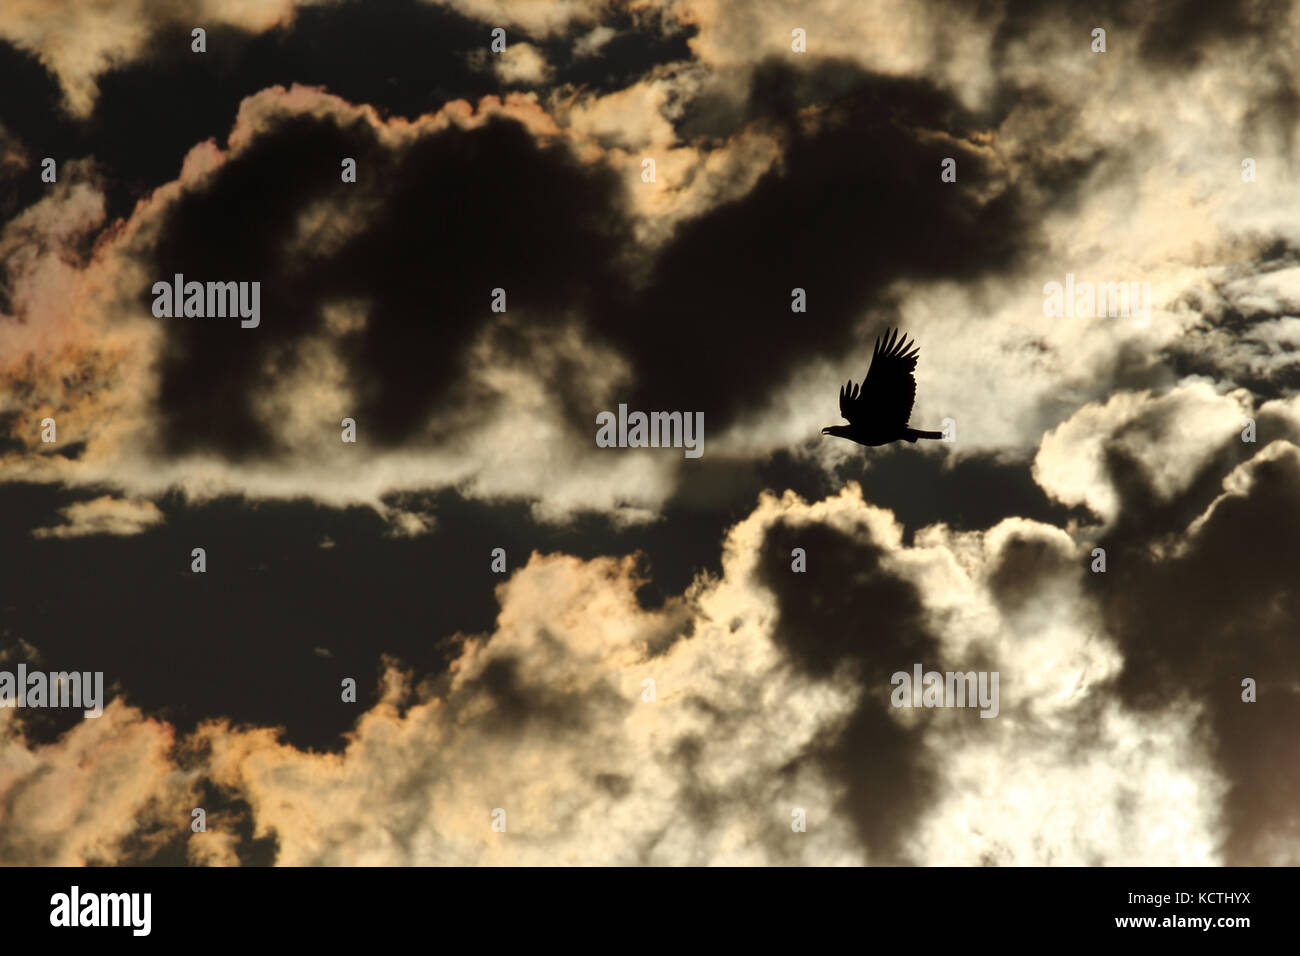 A bald eagle silhouette soaring in the clouds Stock Photo